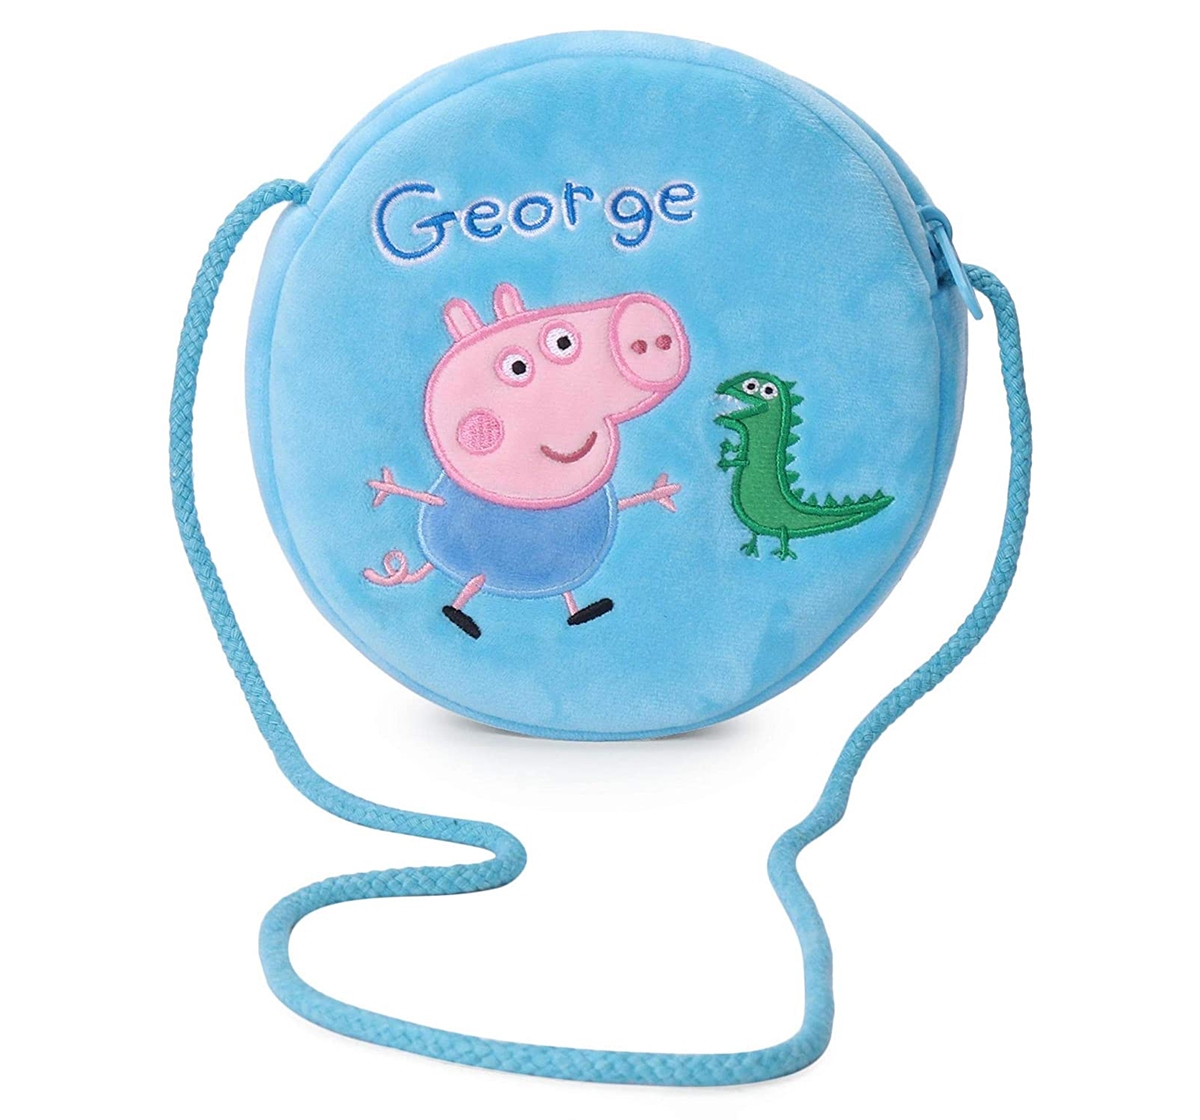 Peppa Pig | Peppa Pig George with Dino Round Sling Bag Plush Accessory for Kids age 3Y+ - 16 Cm (Blue)